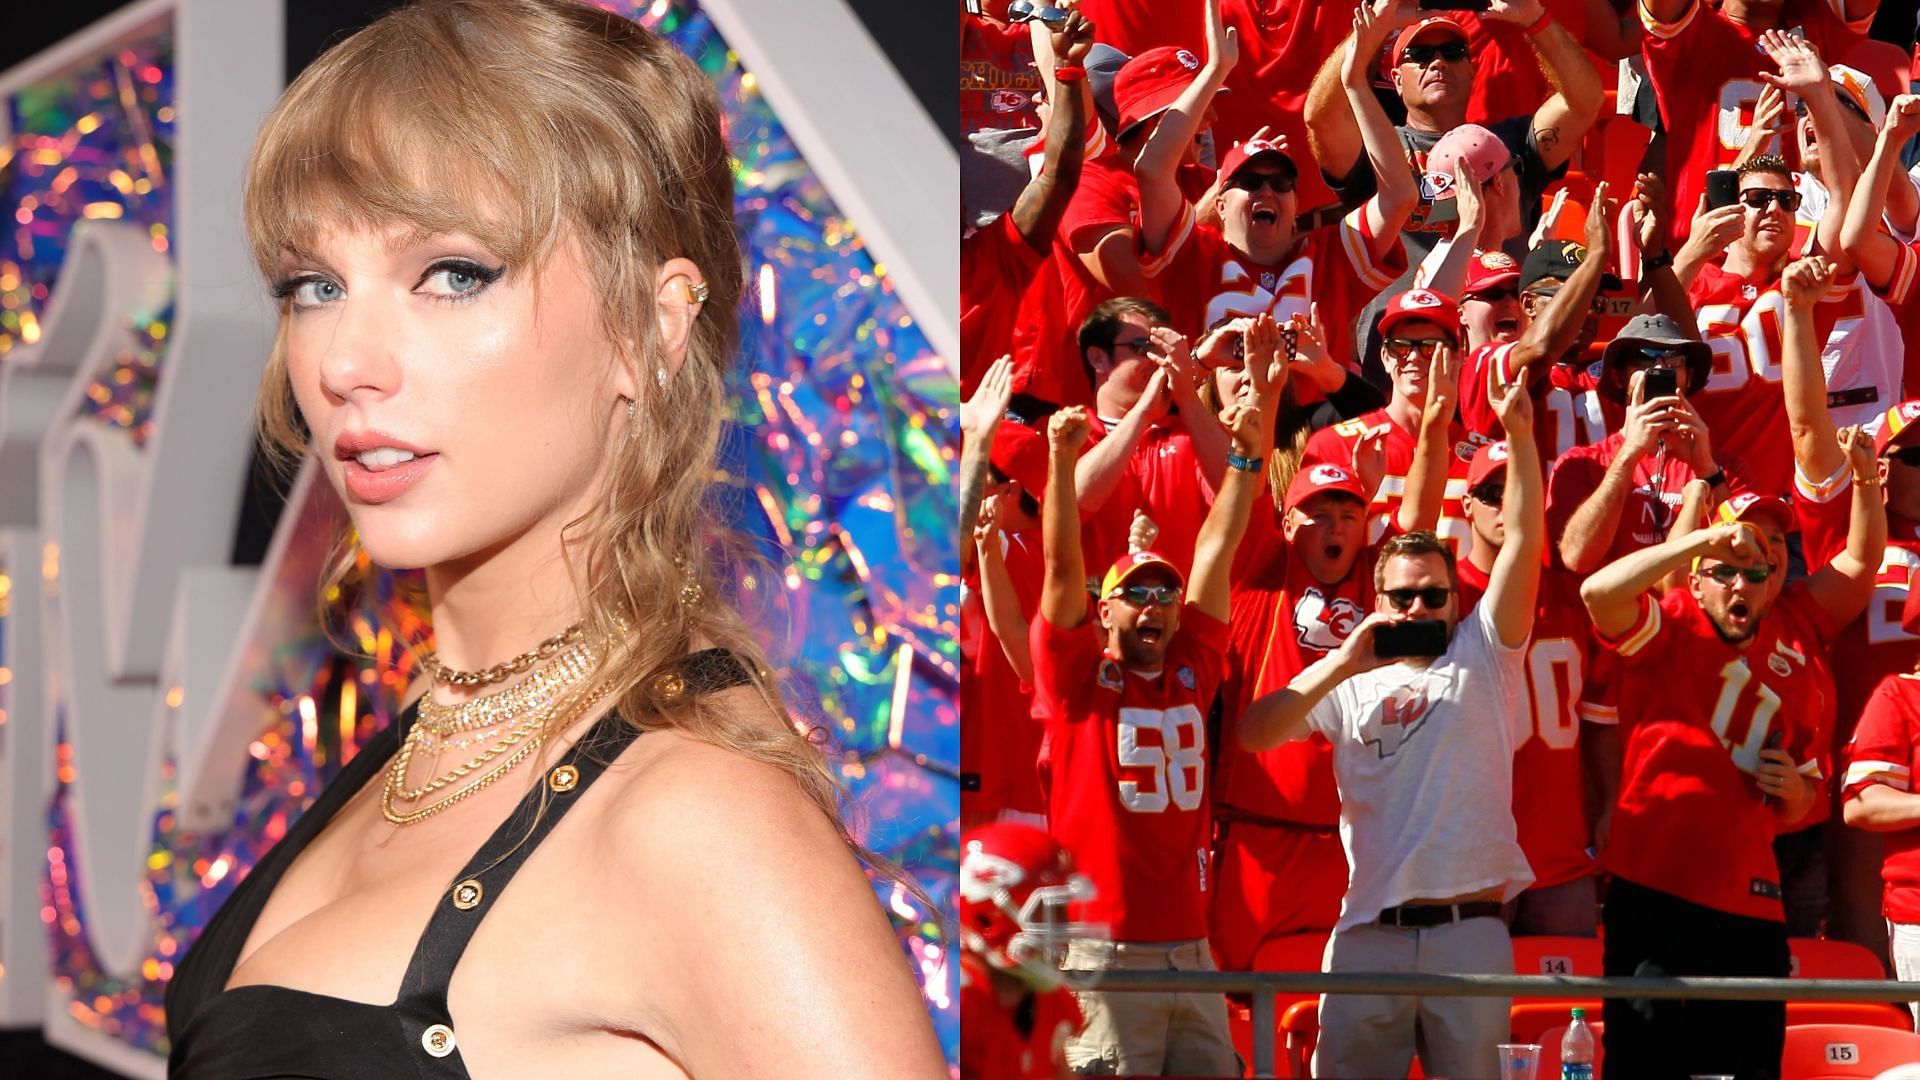 Fans are angry that Taylor Swift is affecting the prices of the tickets for the Chiefs home game.